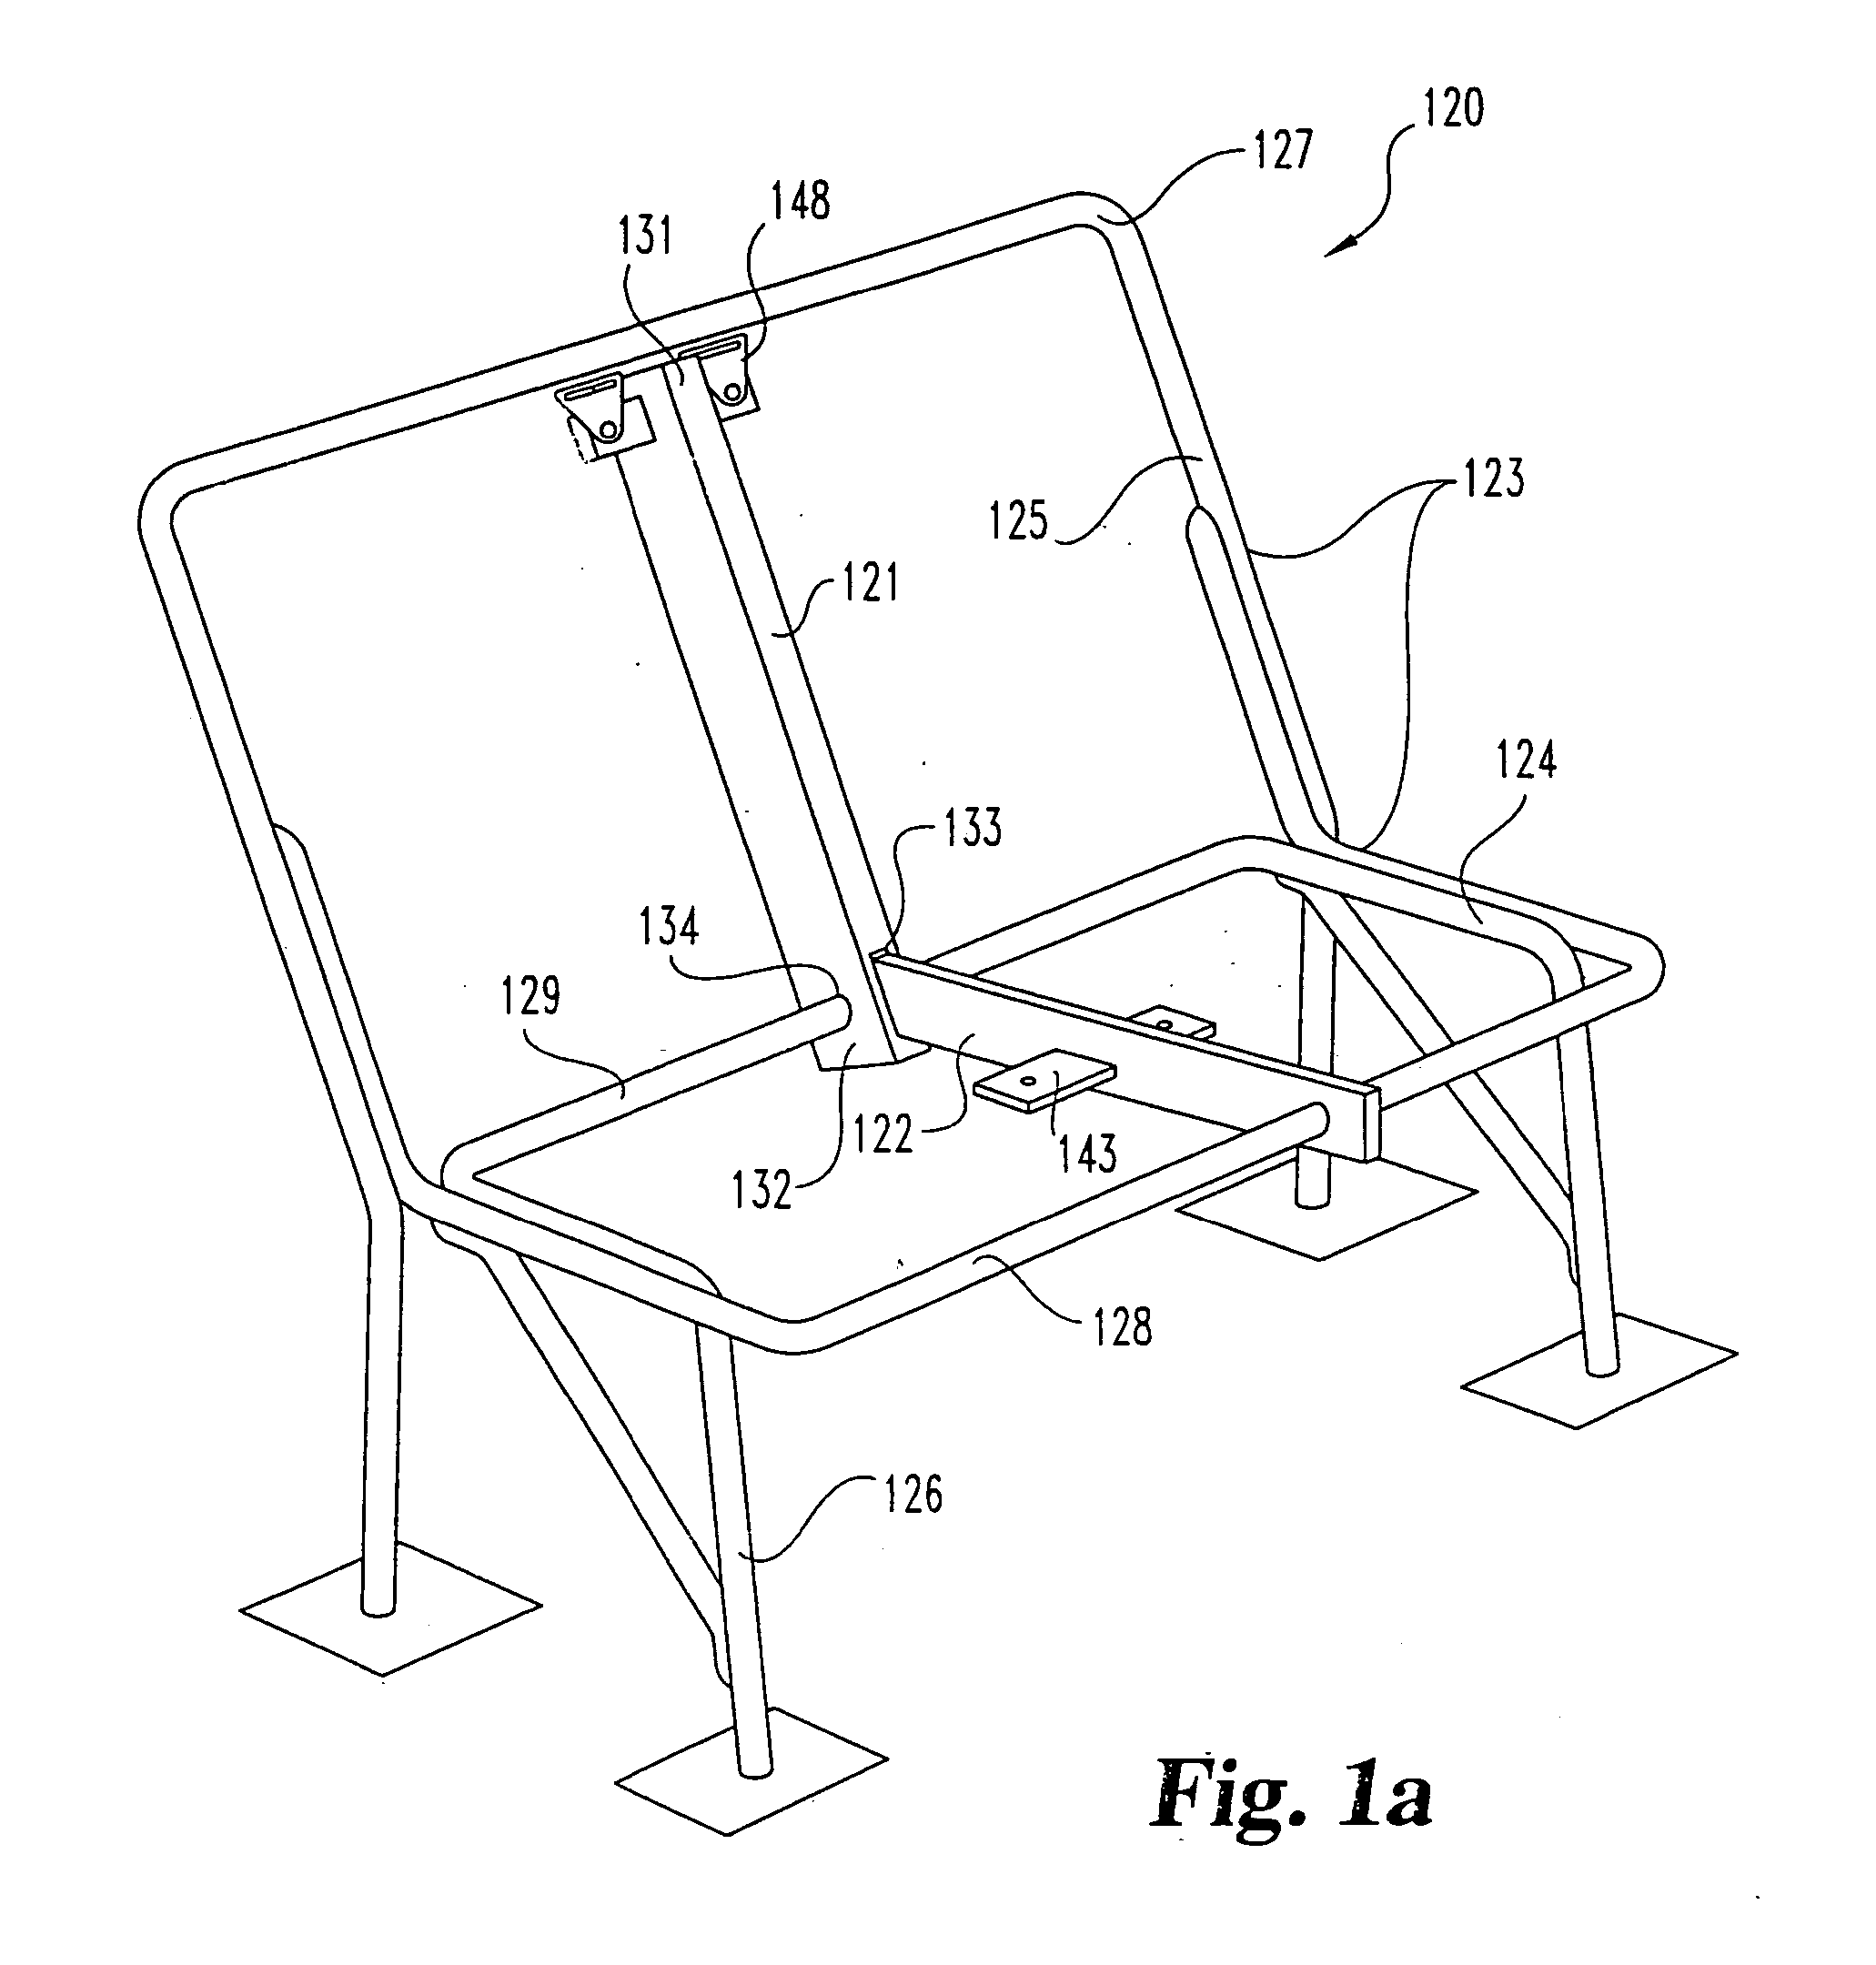 Child restraint system for a vehicle seat